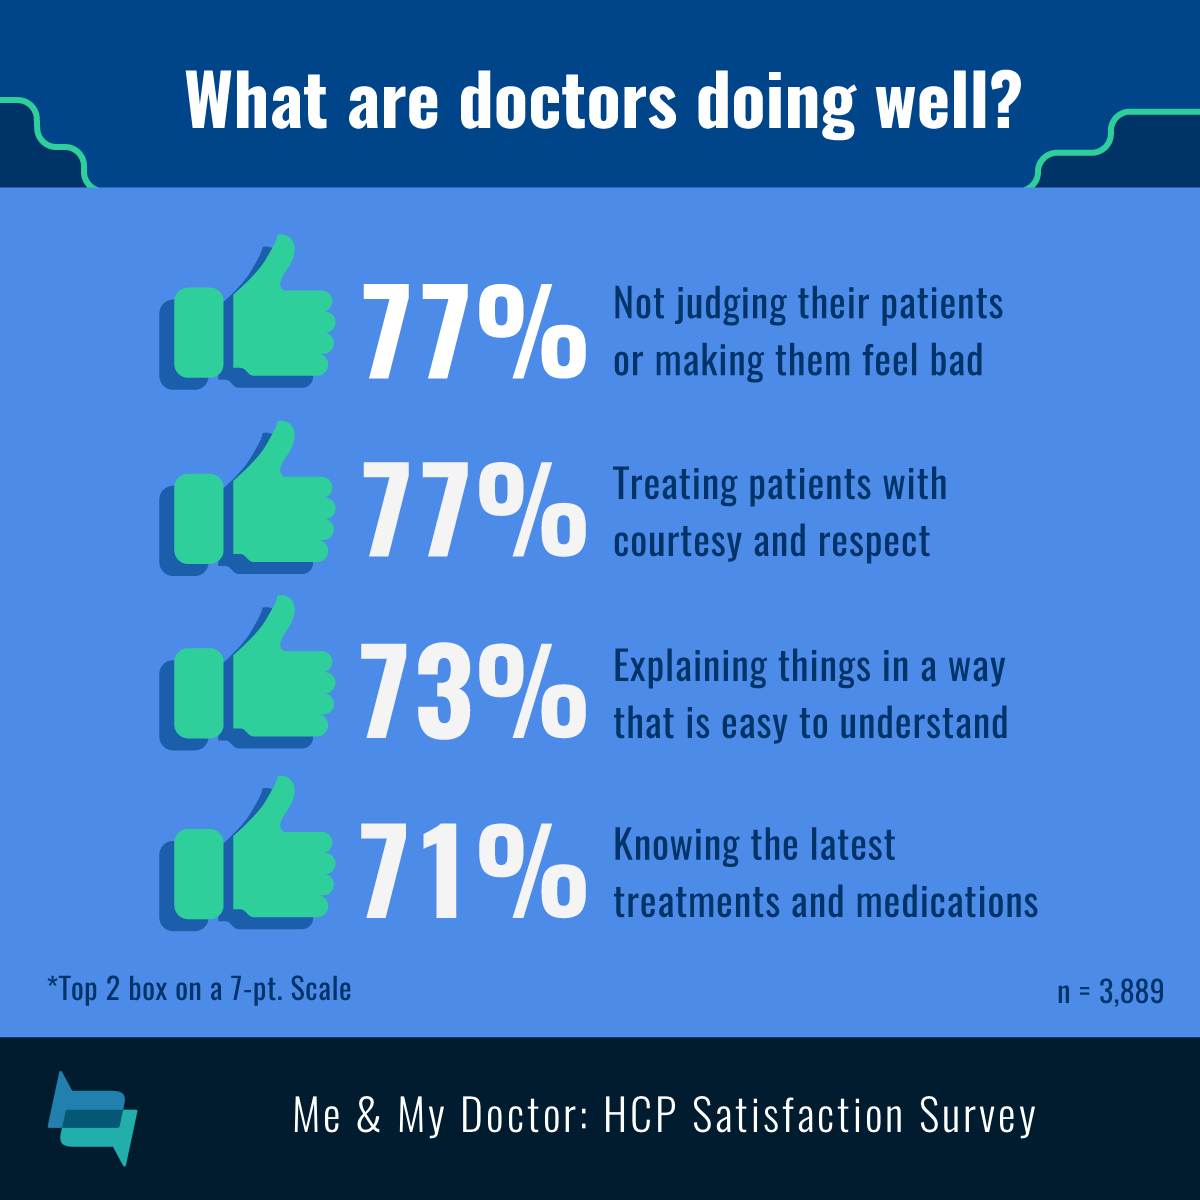 Doctors are not judging patients (77%), treating them with respect (77%), explaining well (73%), and knowing the latest treatments (71%).